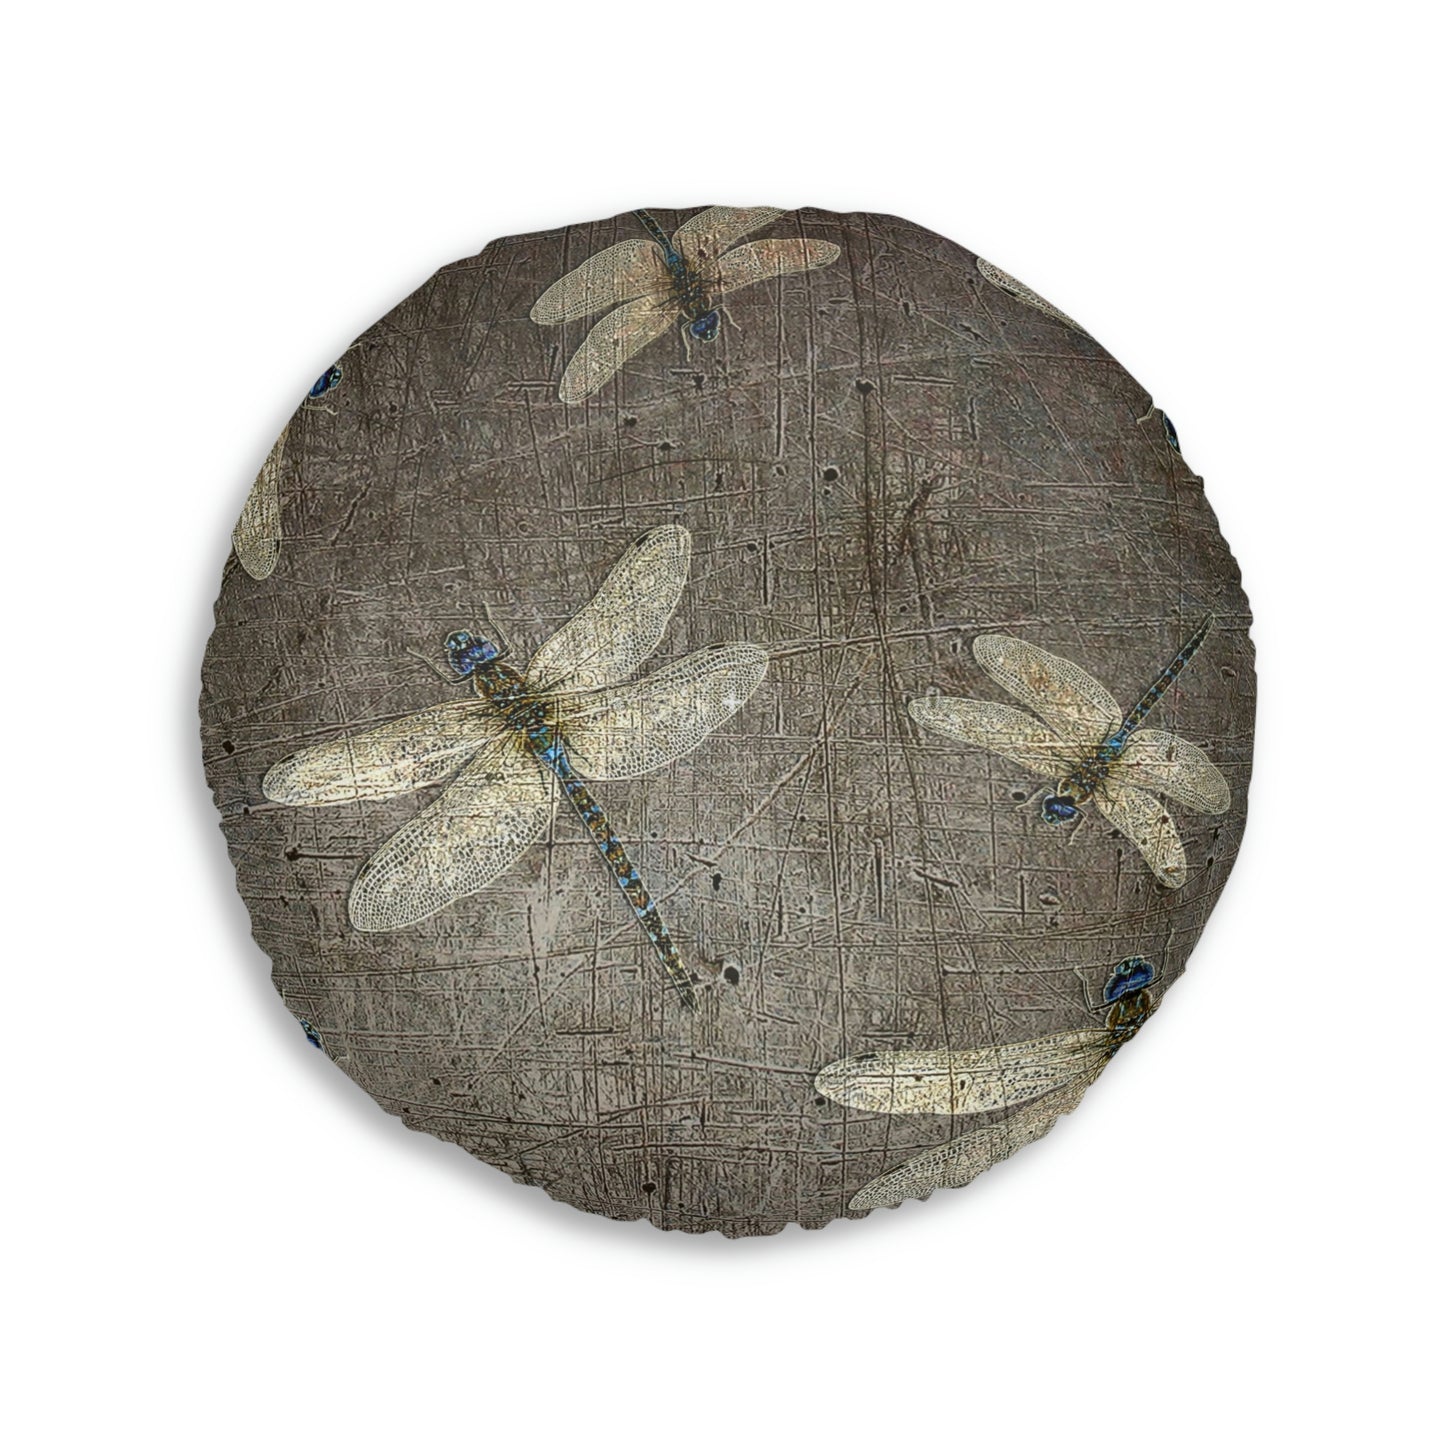 Dragonfly on Distressed Stone Background Print on 2 Sided Round Tufted Floor Pillow.